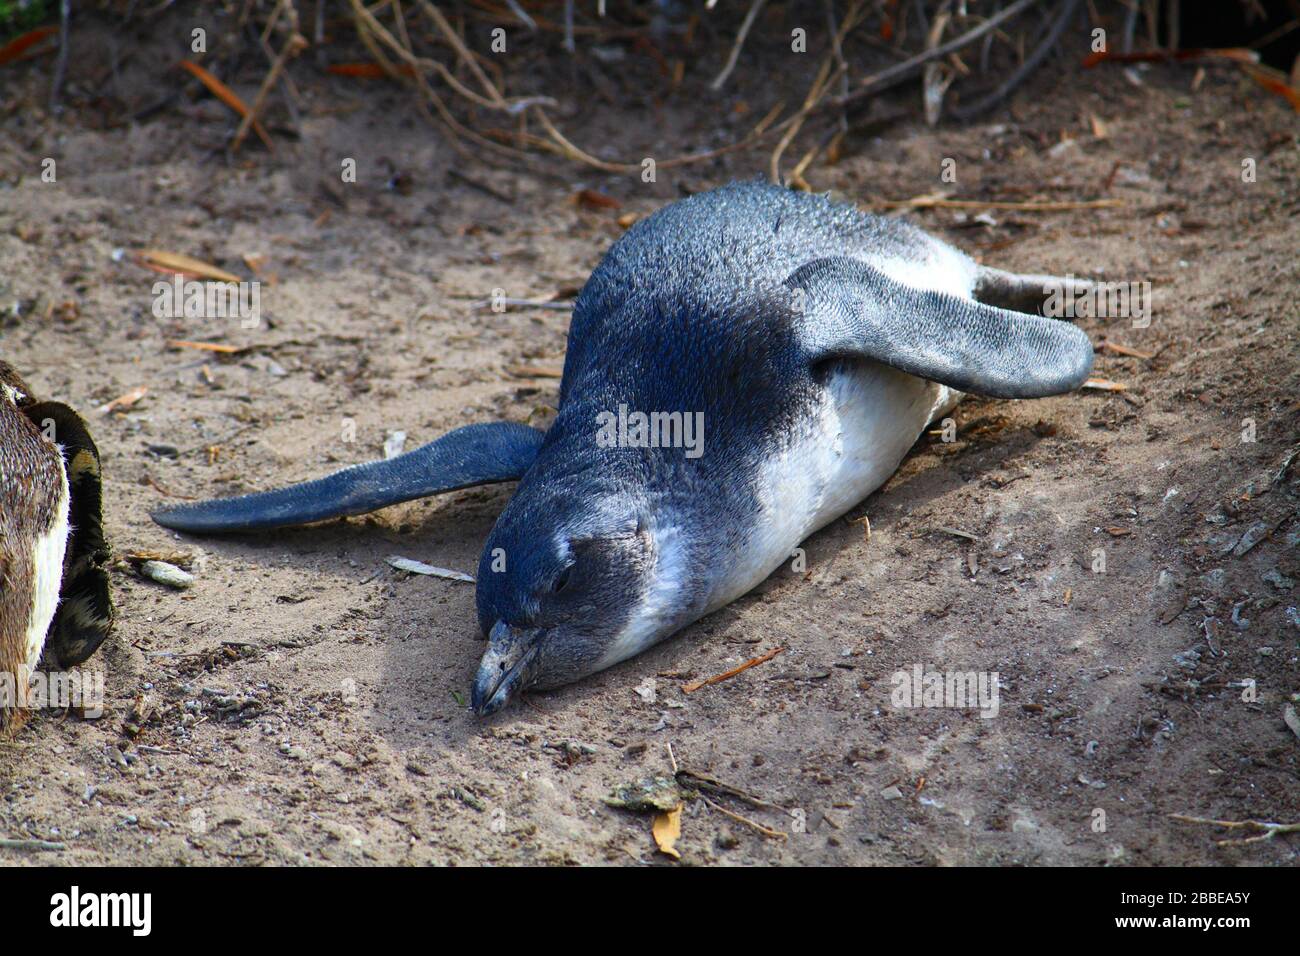 Stress Urlaub High Resolution Stock Photography and Images - Alamy